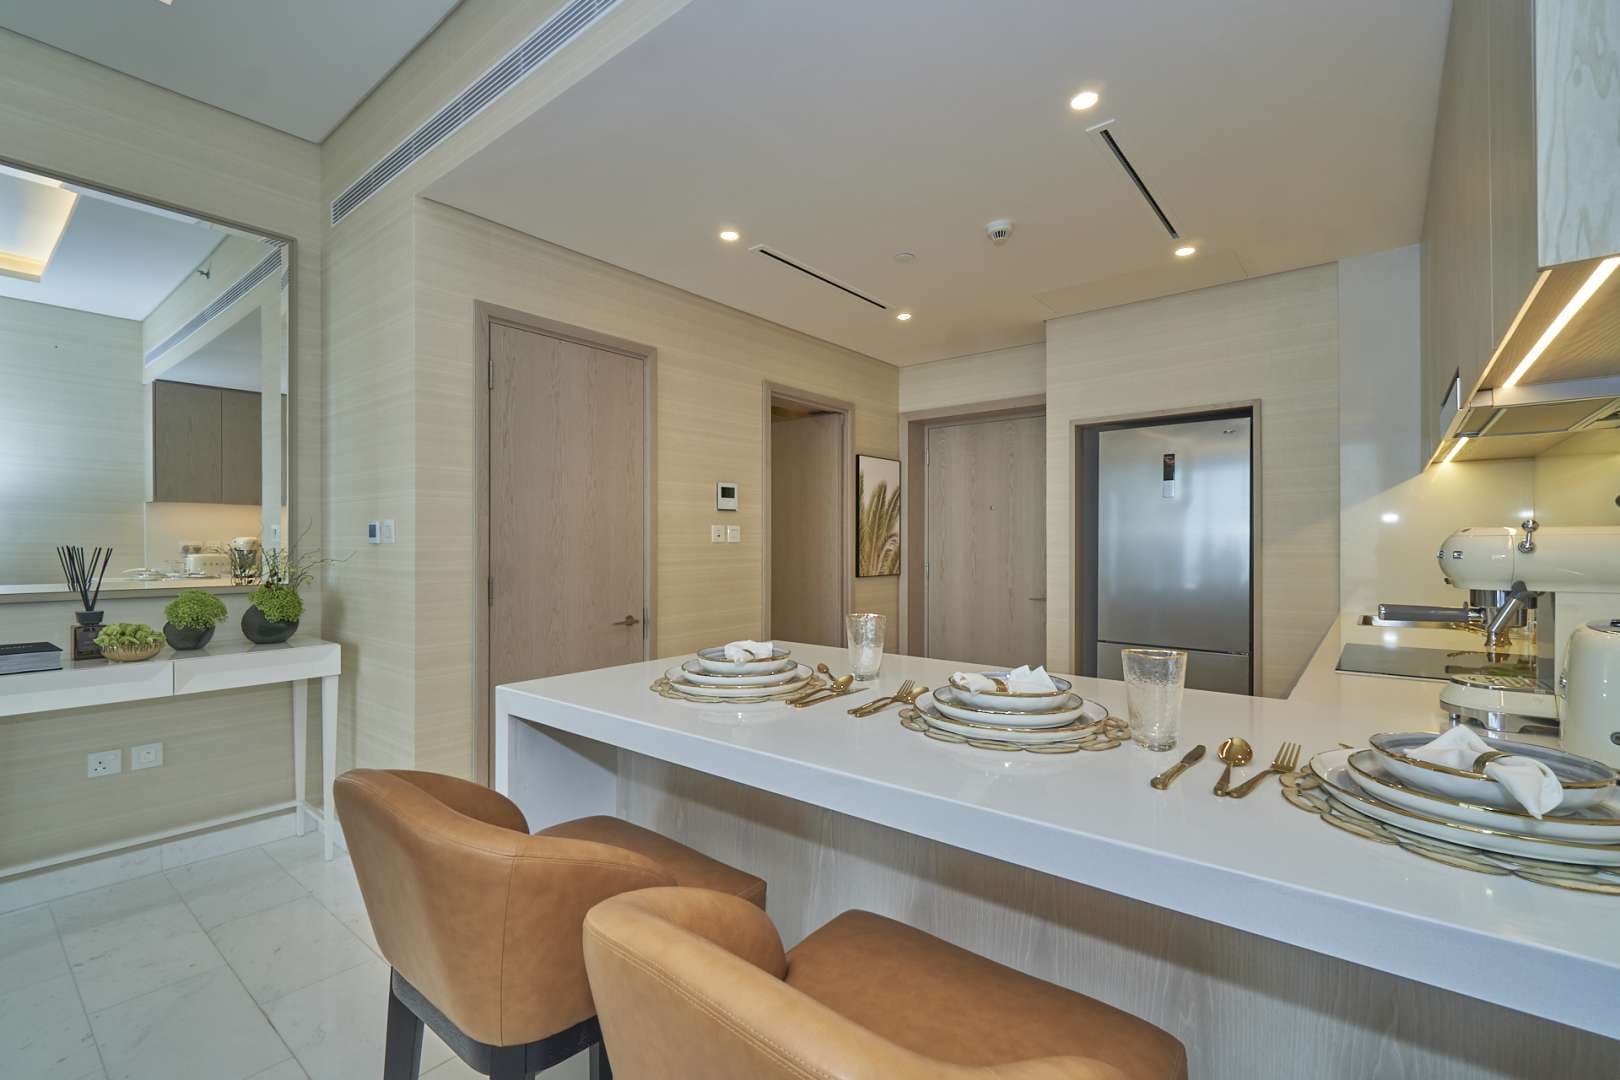 1 Bedroom Apartment For Sale The Palm Tower Lp07264 Dffb8f4fcd01880.jpg